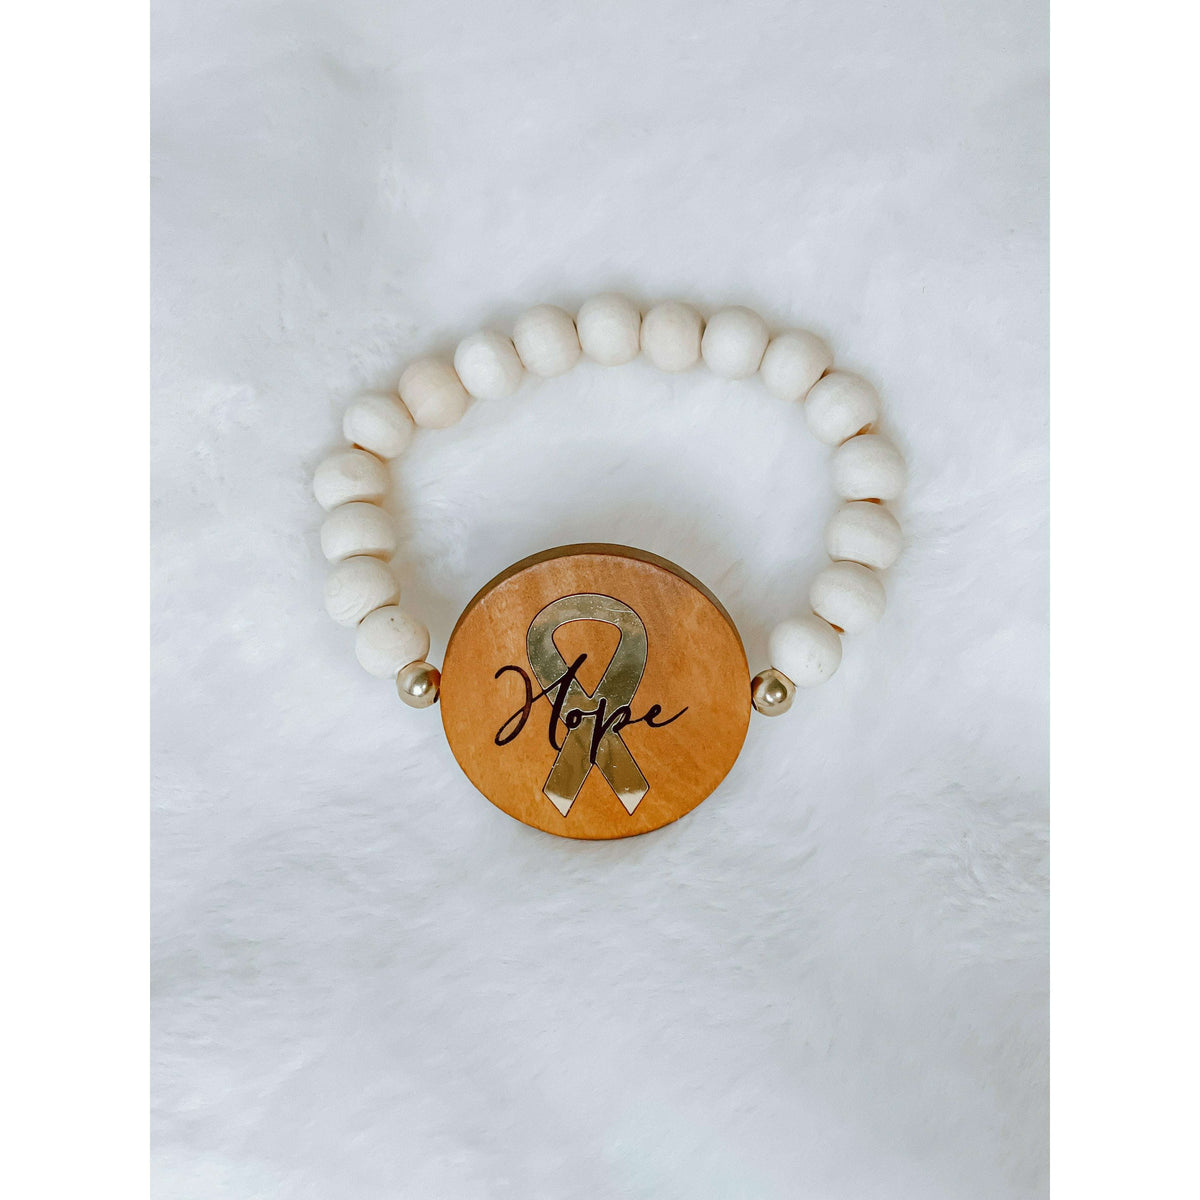 Childhood Cancer Awareness HOPE Bracelet - The Hive by Chris Jesselle